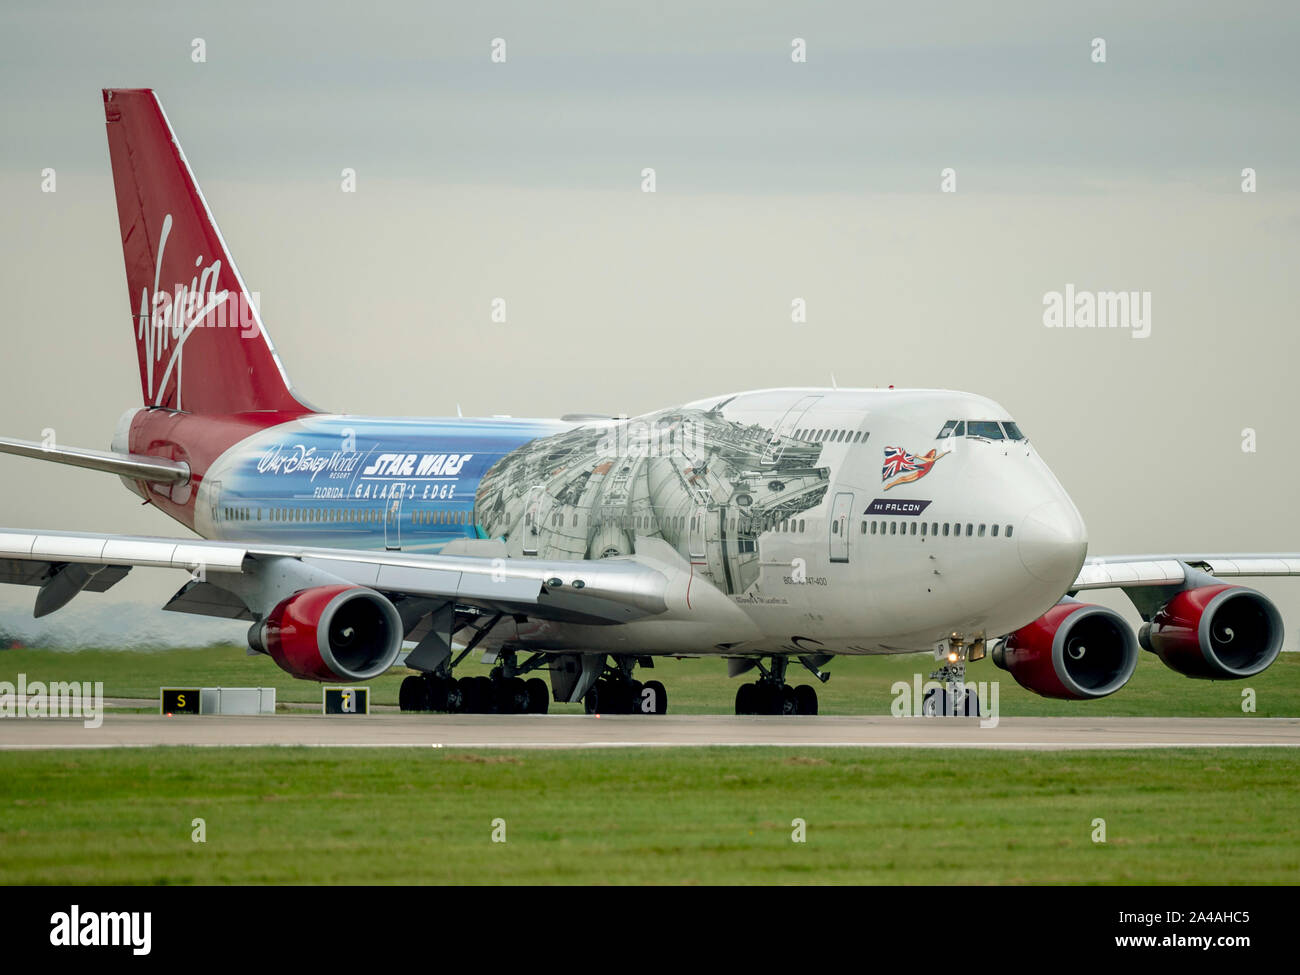 Virgin Alantic, Boeing 747-400 "The Falcon" Star Wars theme Livery,  G-VLIP at Manchester Airport Stock Photo